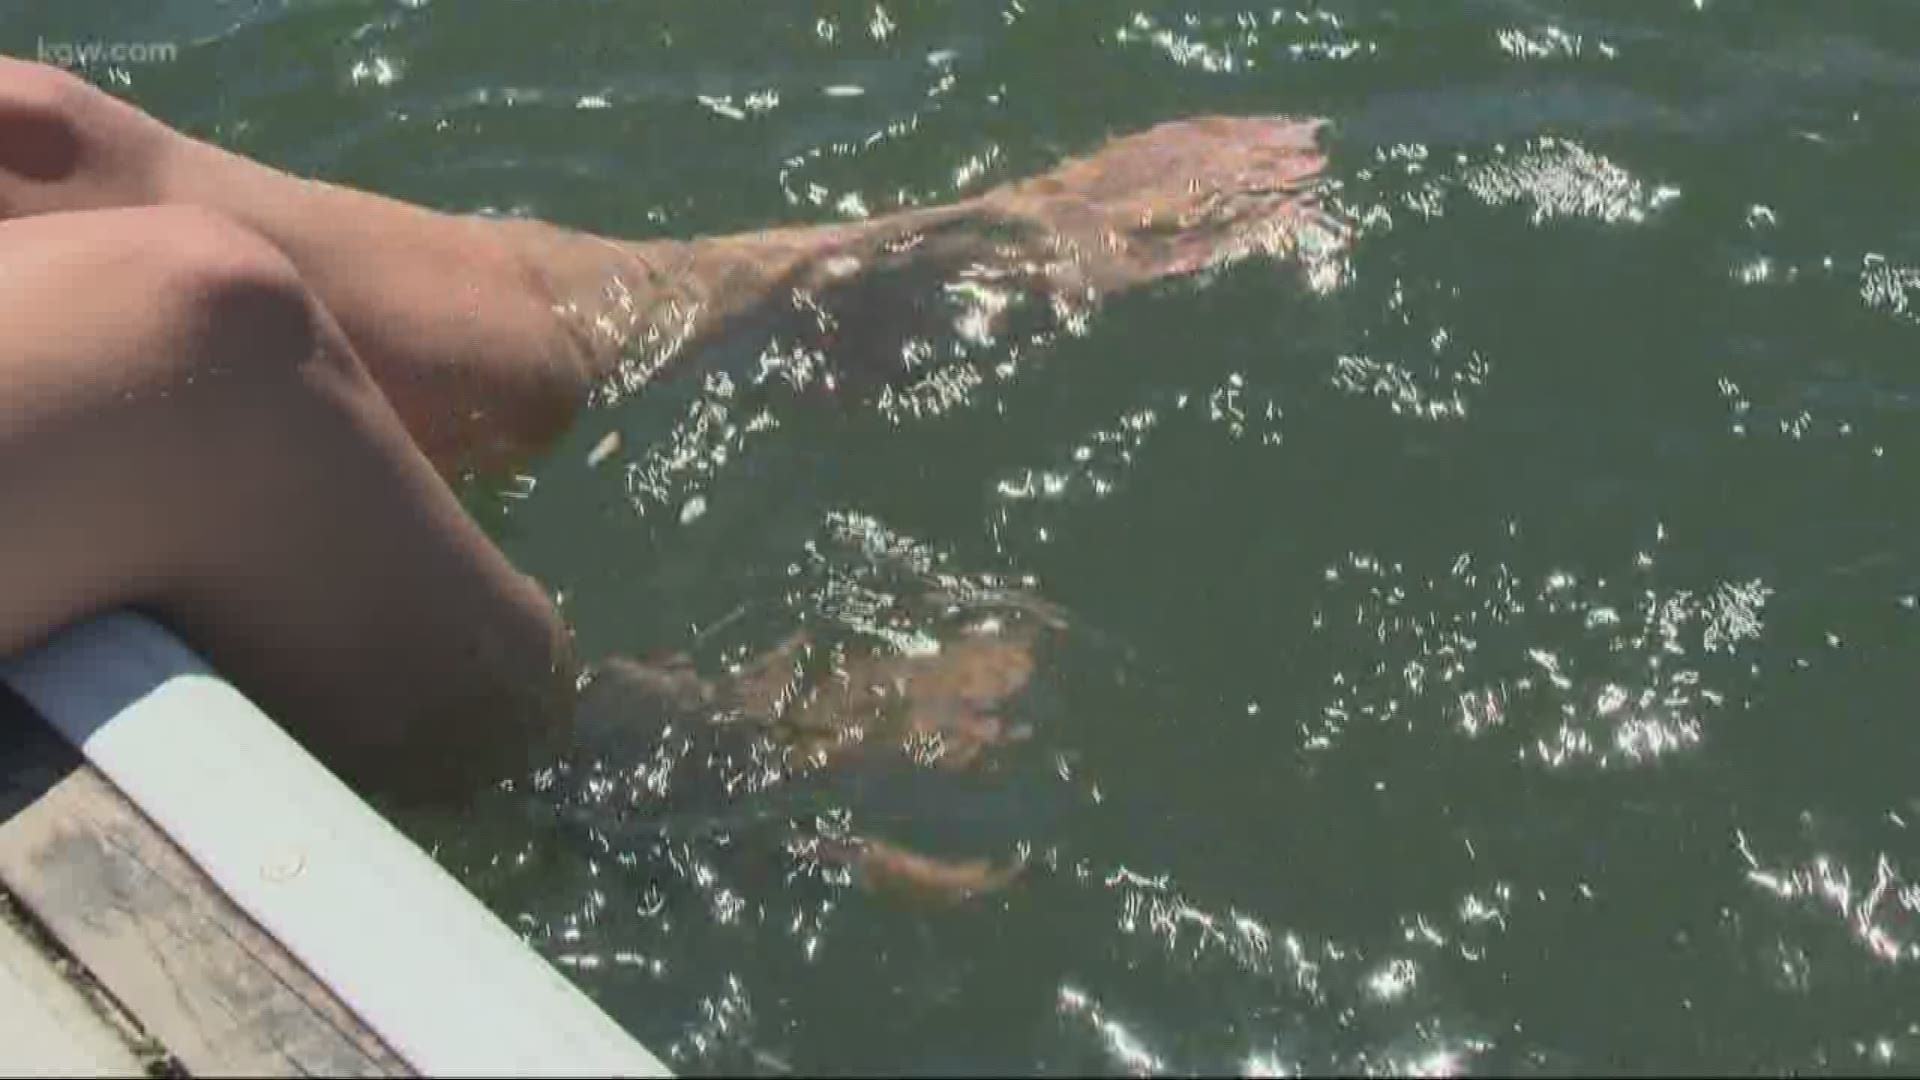 Early season swimmers recommended to take precautions when swimming in the Willamette River.